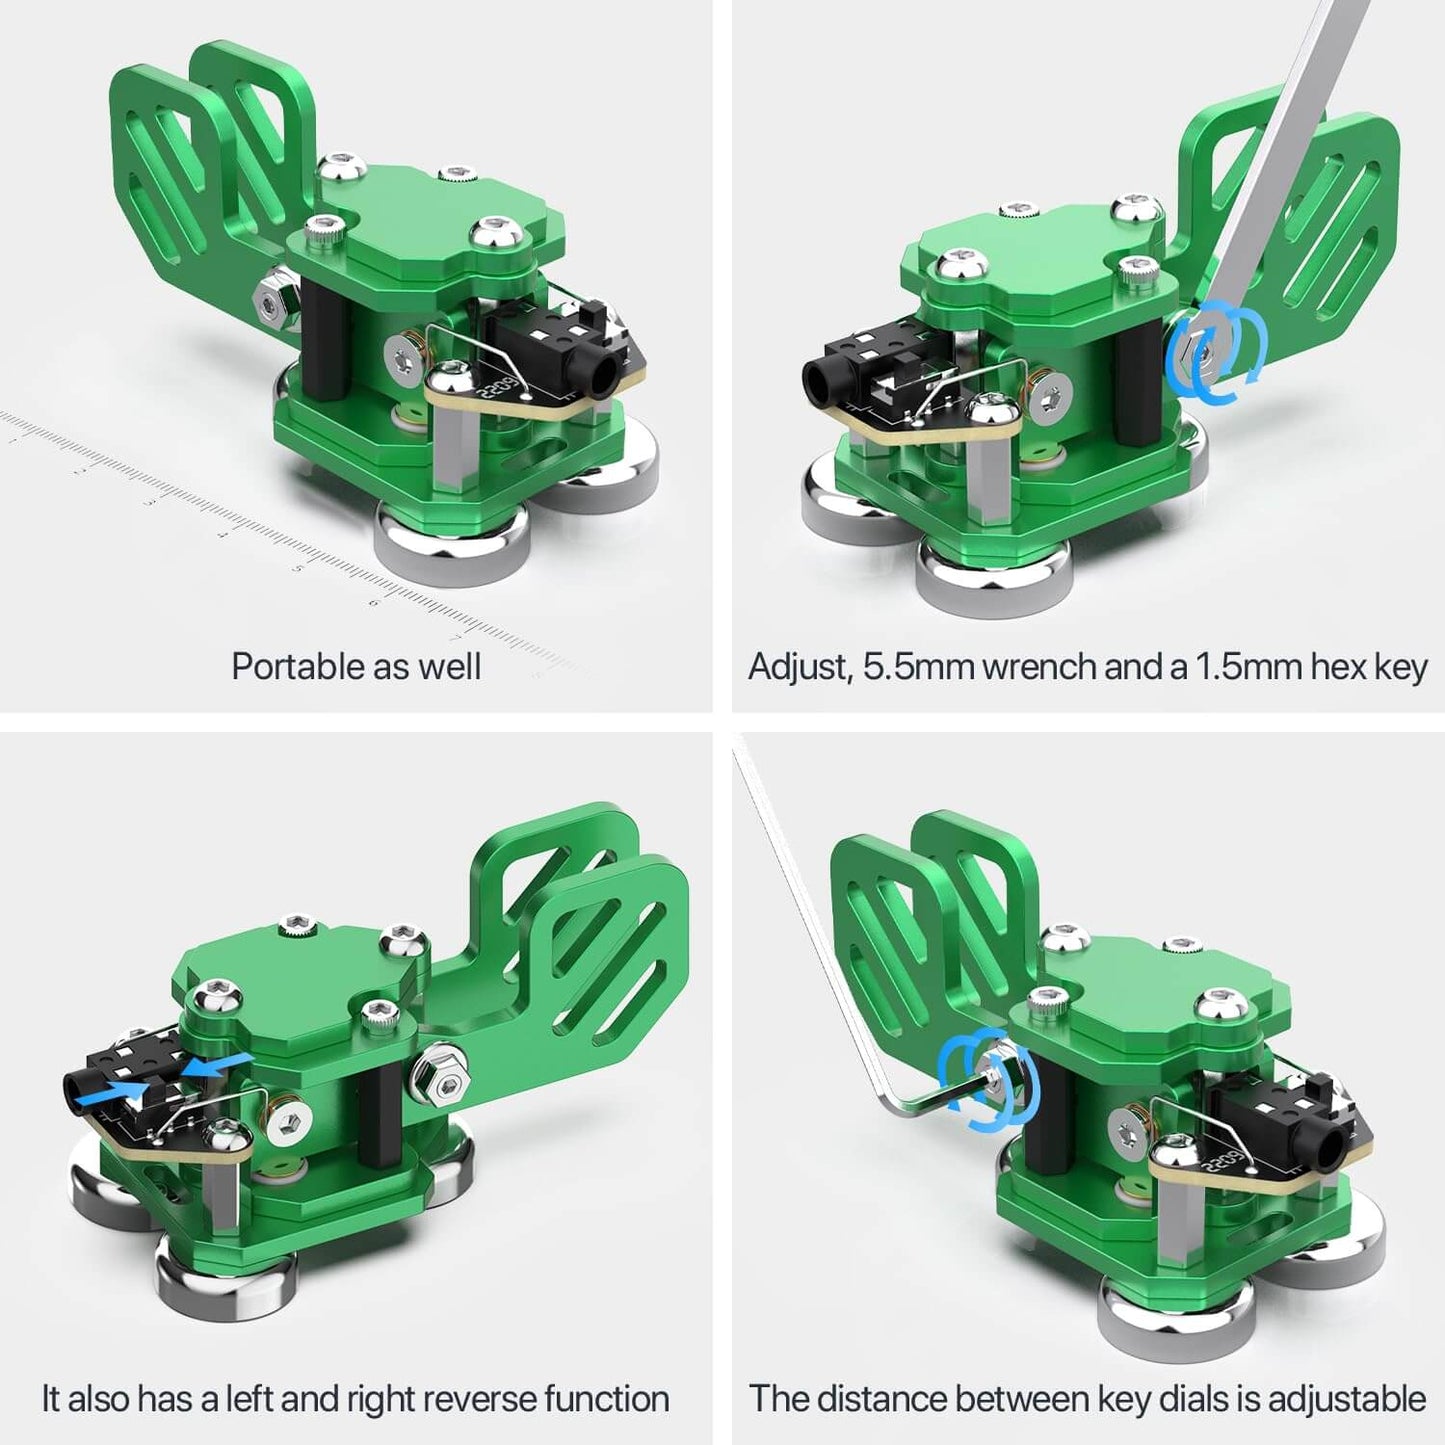 This is green one CW Keyer Automatic Morse Mini Crafted from aluminum, with magnetic paddle for comfortable use. Weighs 0.24LB (106g).perfect for outdoor use. Customize Dit &amp; Dah Paddle Distance for personalized comfort. Features left and right-hand switches for versatile operation. Includes 3.5mm Standard Stereo Receptacle for easy hookup.